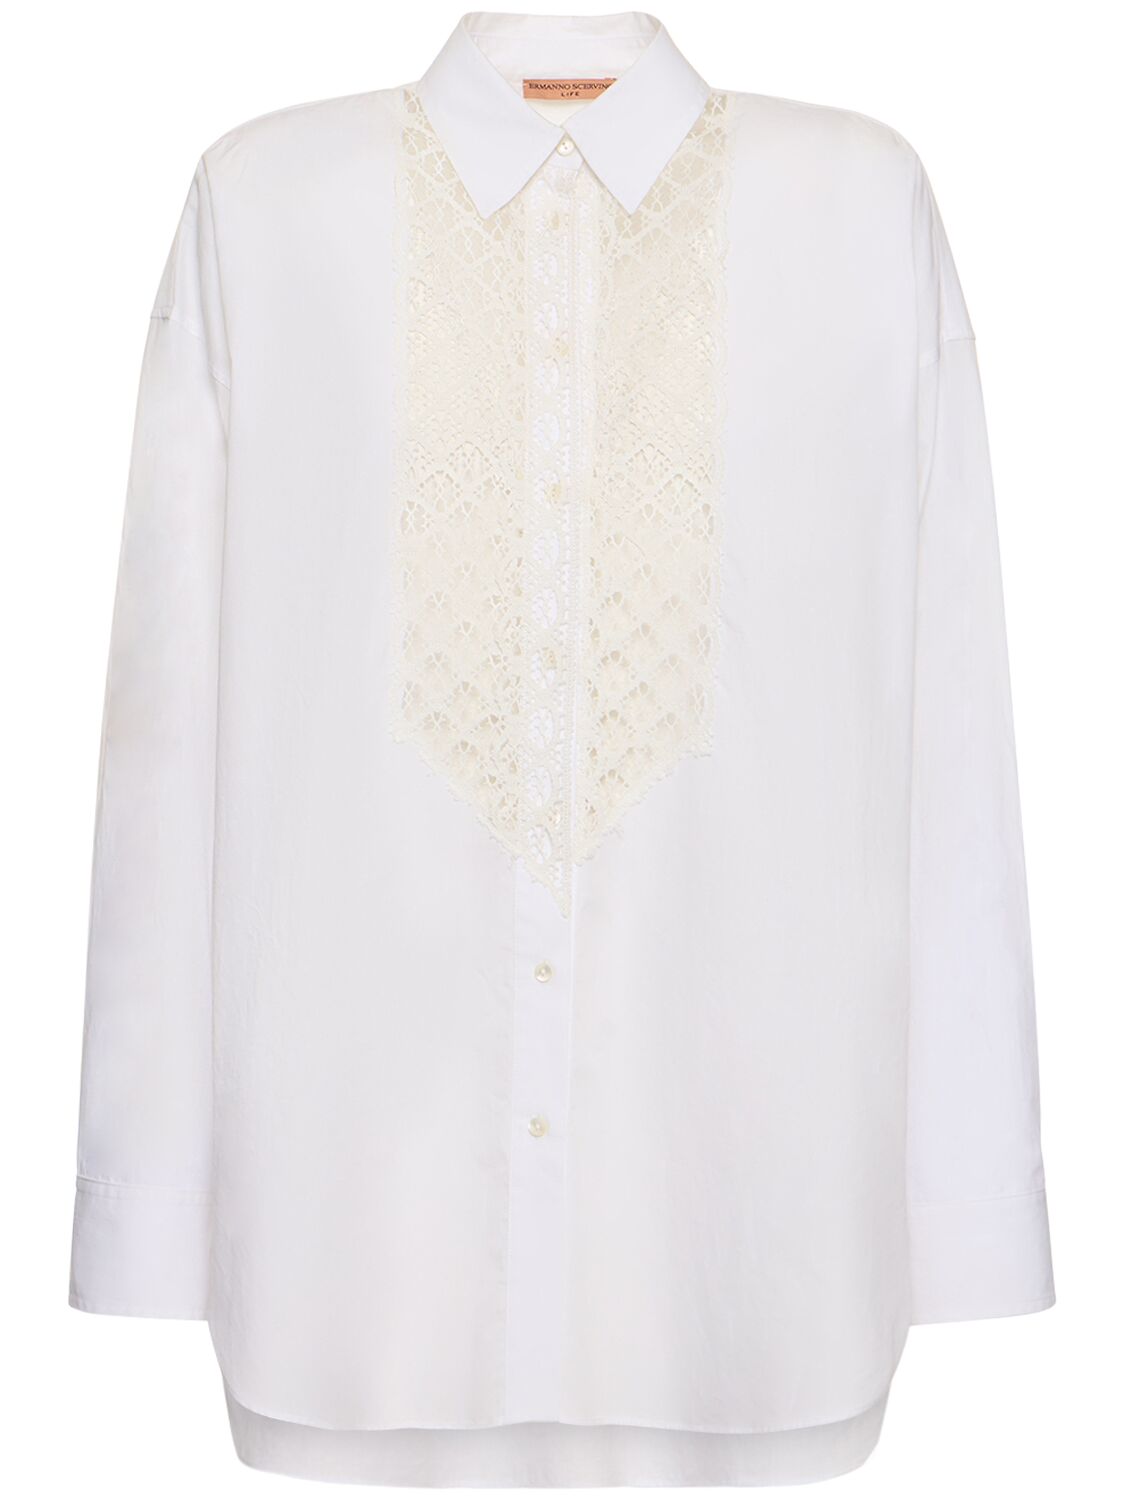 Image of Embroidered Cotton Shirt